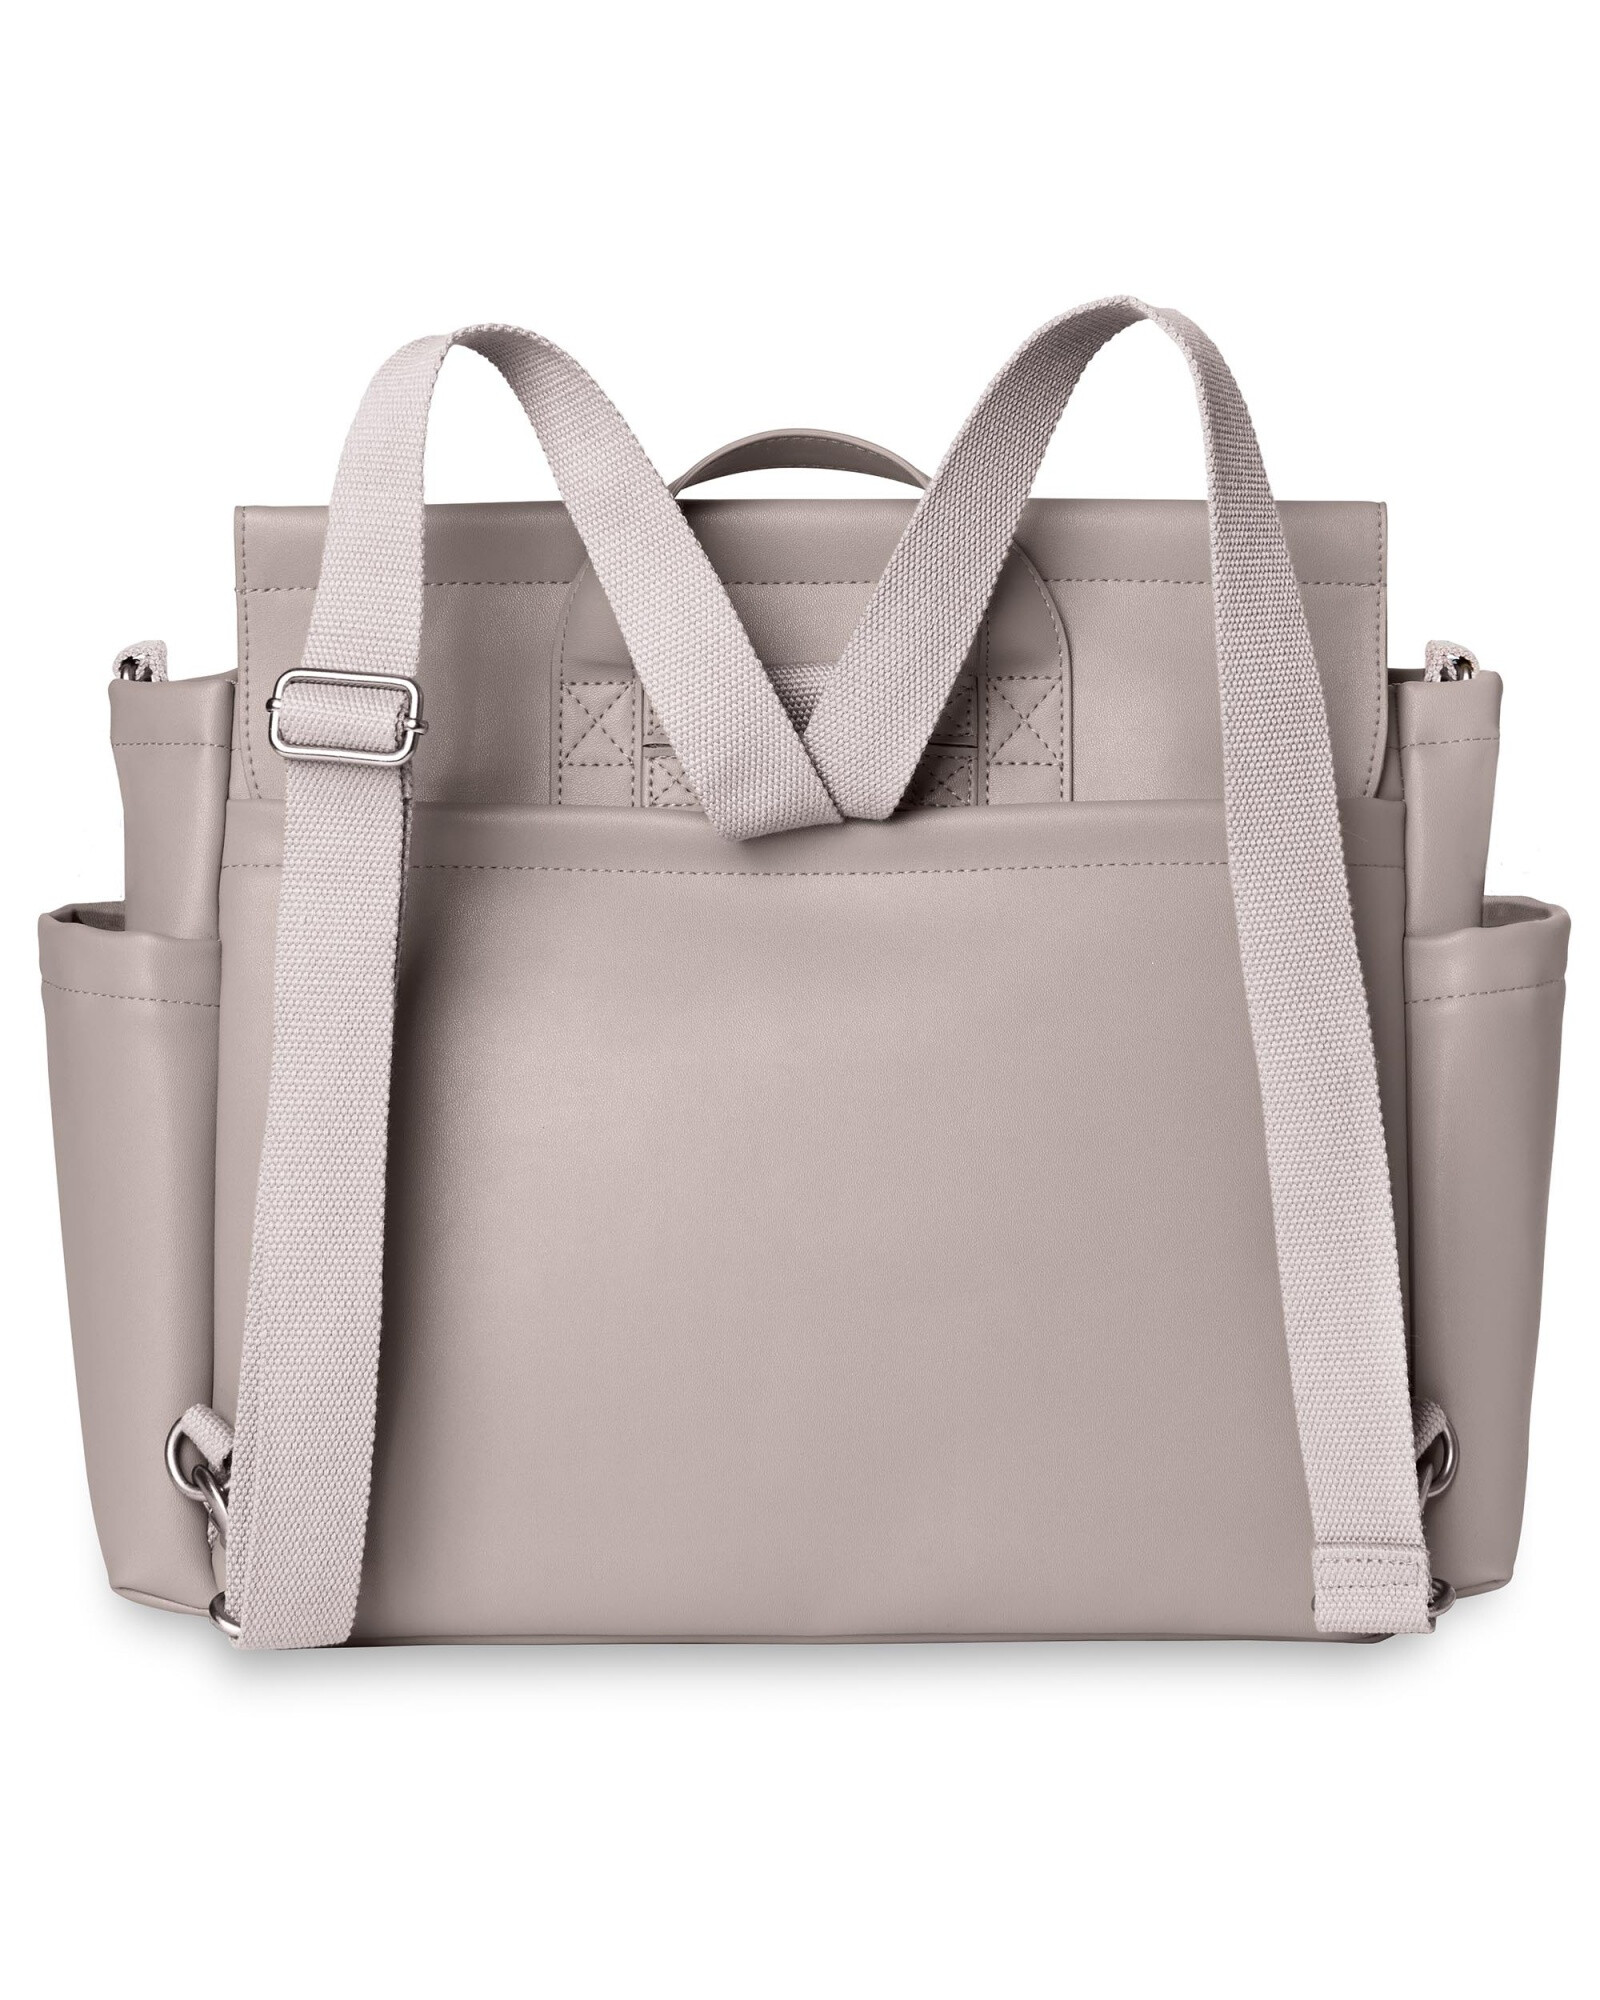 Bolso maternal convertible Greenwich gris Sin color